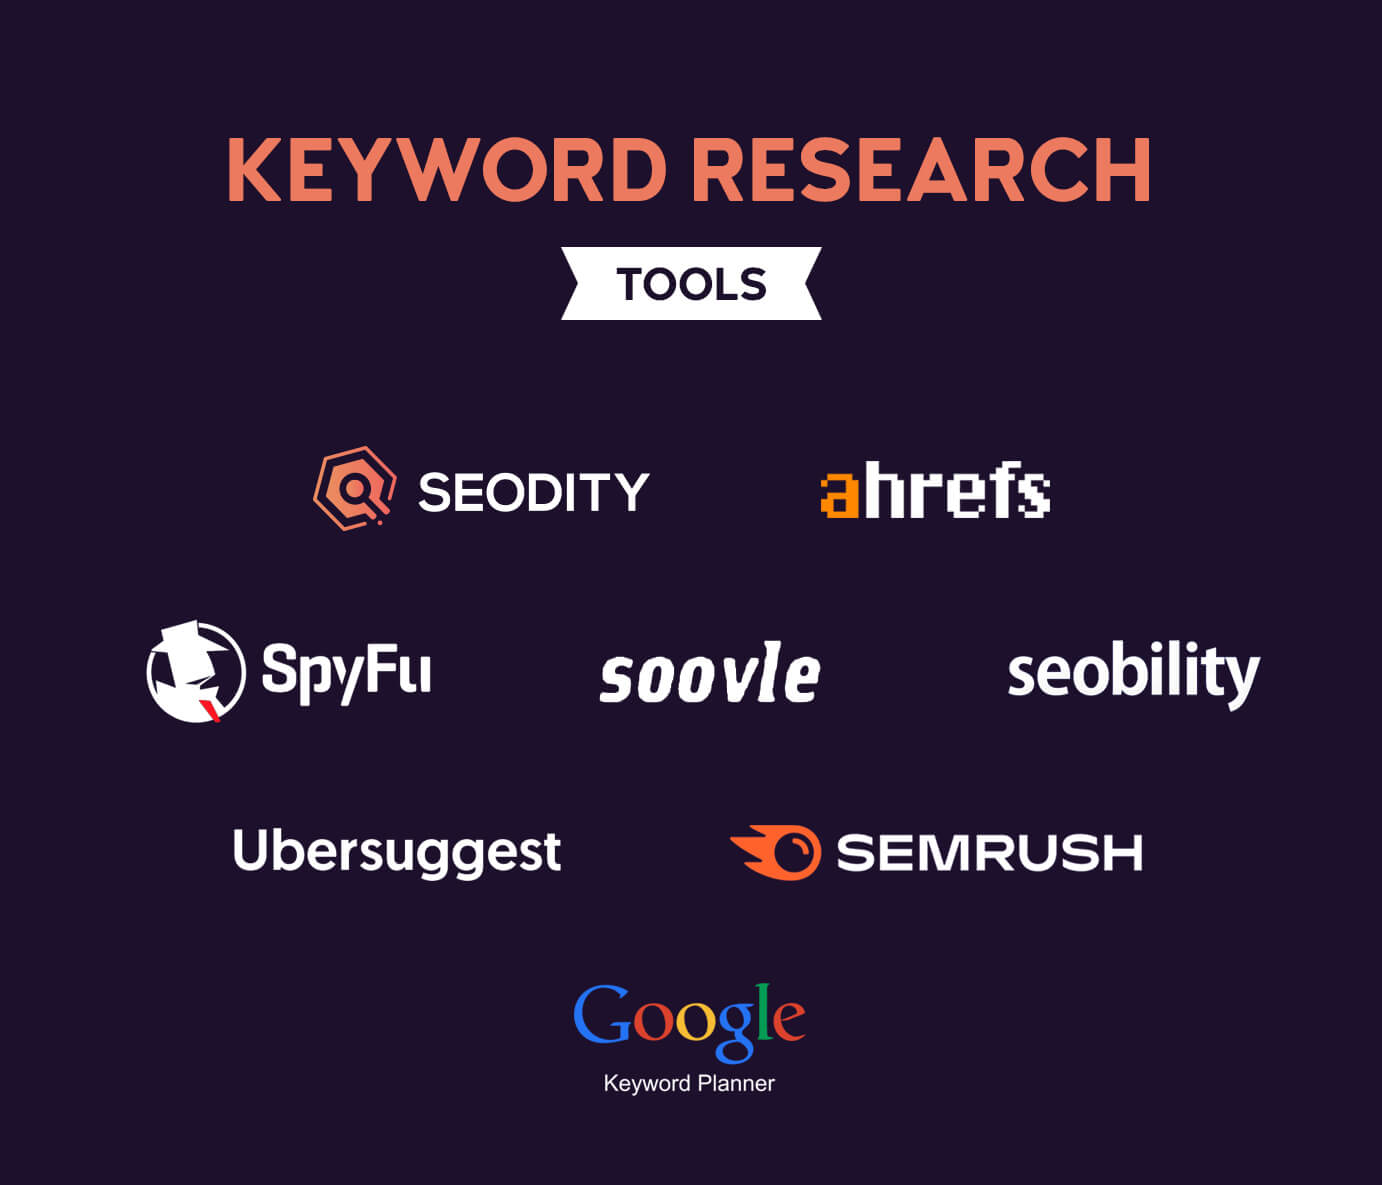 What is a keyword research tools?